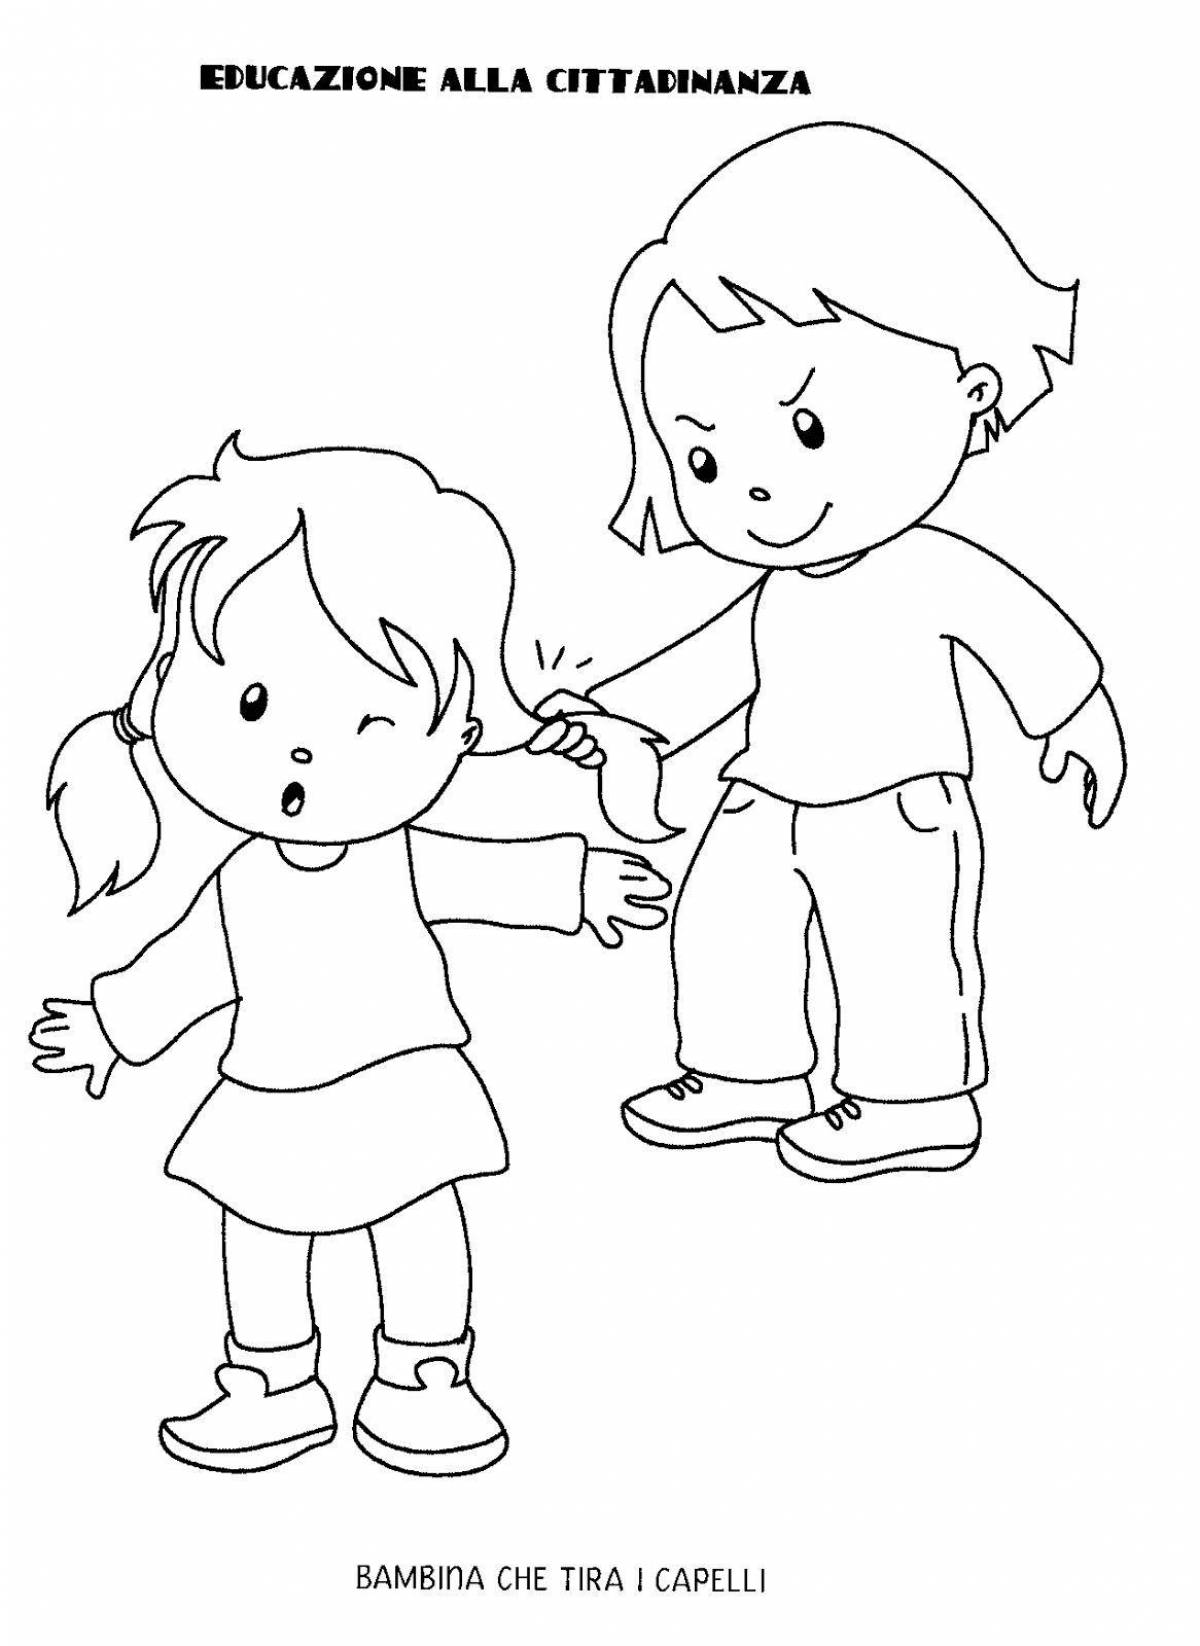 Coloring book funny etiquette for kids